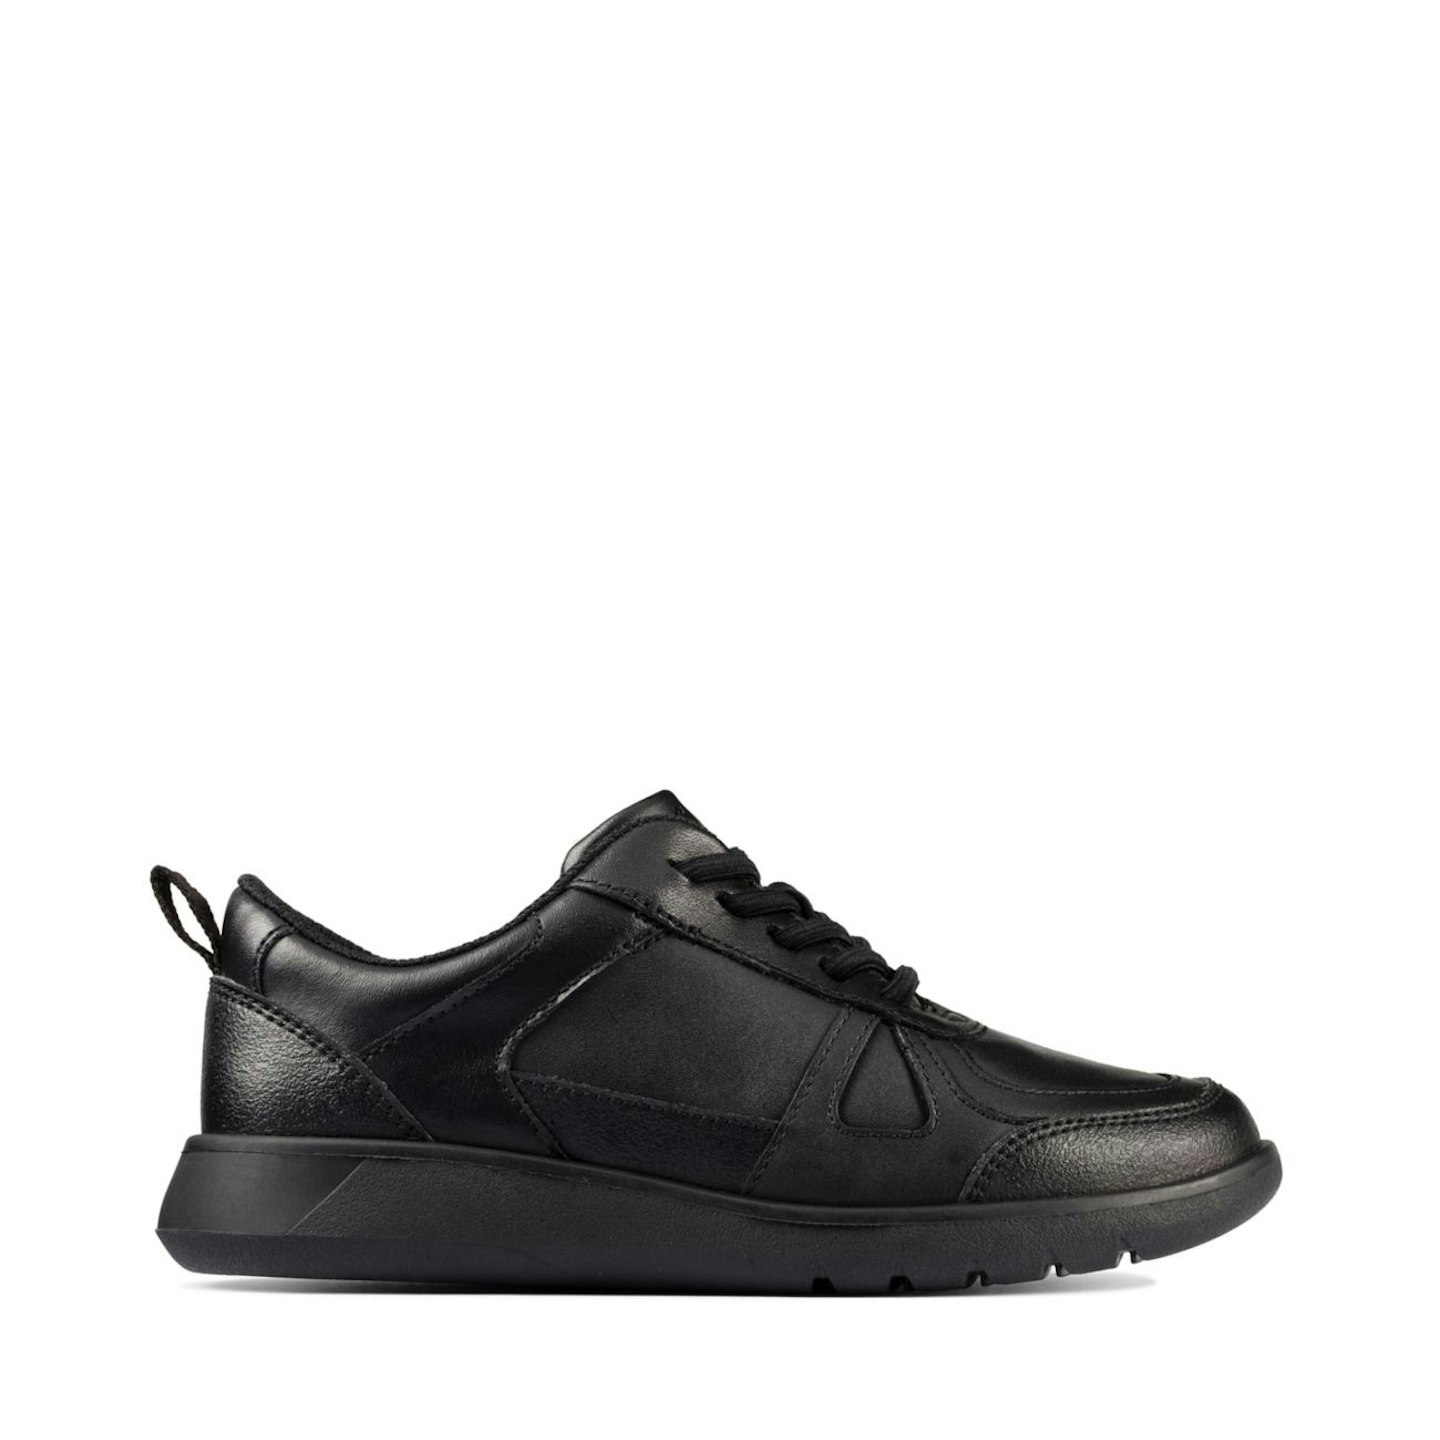 Clarks, Scape Track Kid Black Leather